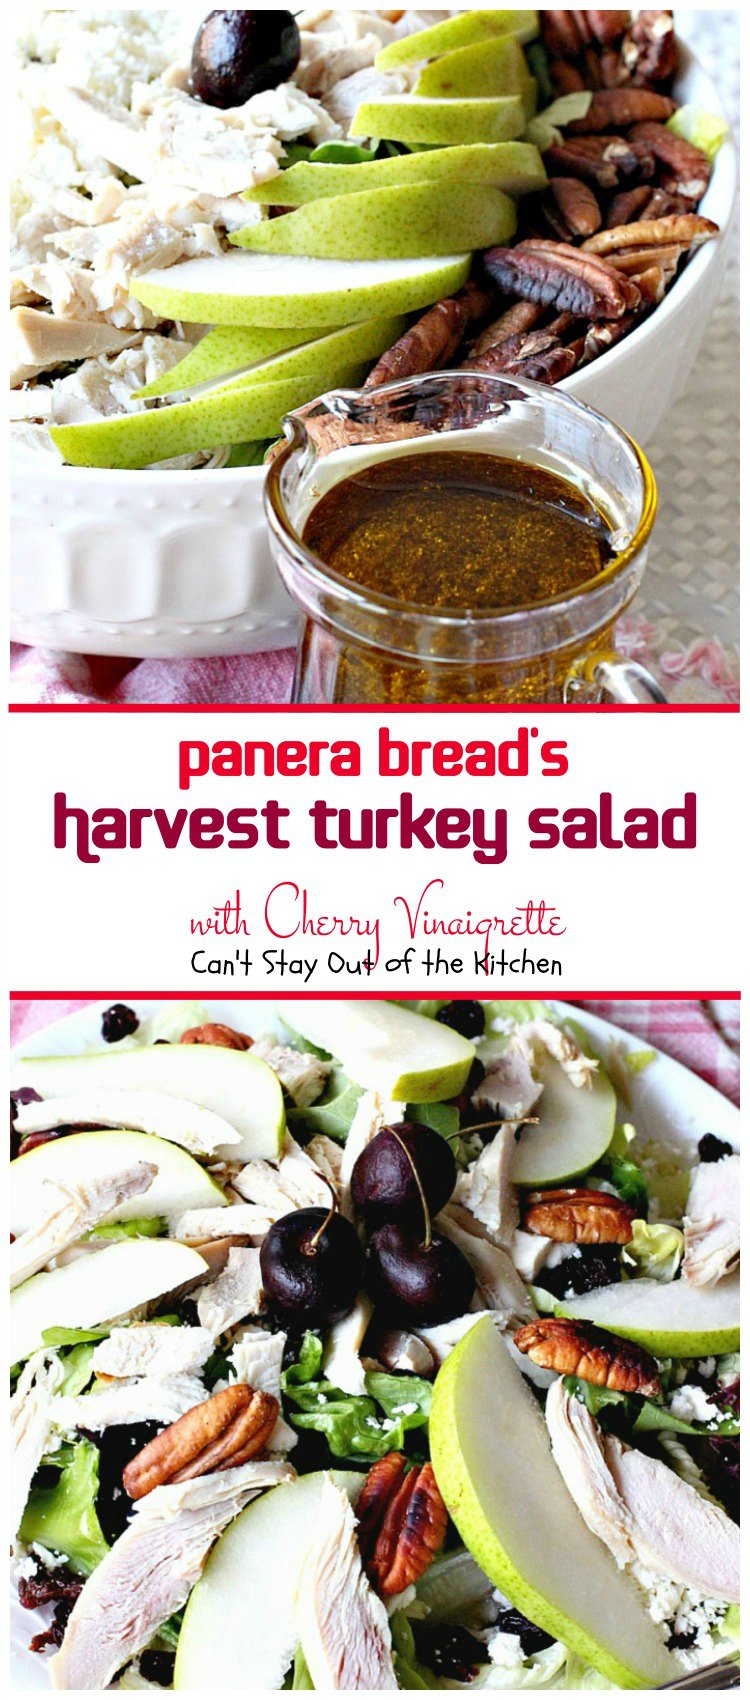 Panera Bread's Harvest Turkey Salad with Cherry Vinaigrette | Can't Stay Out of the Kitchen